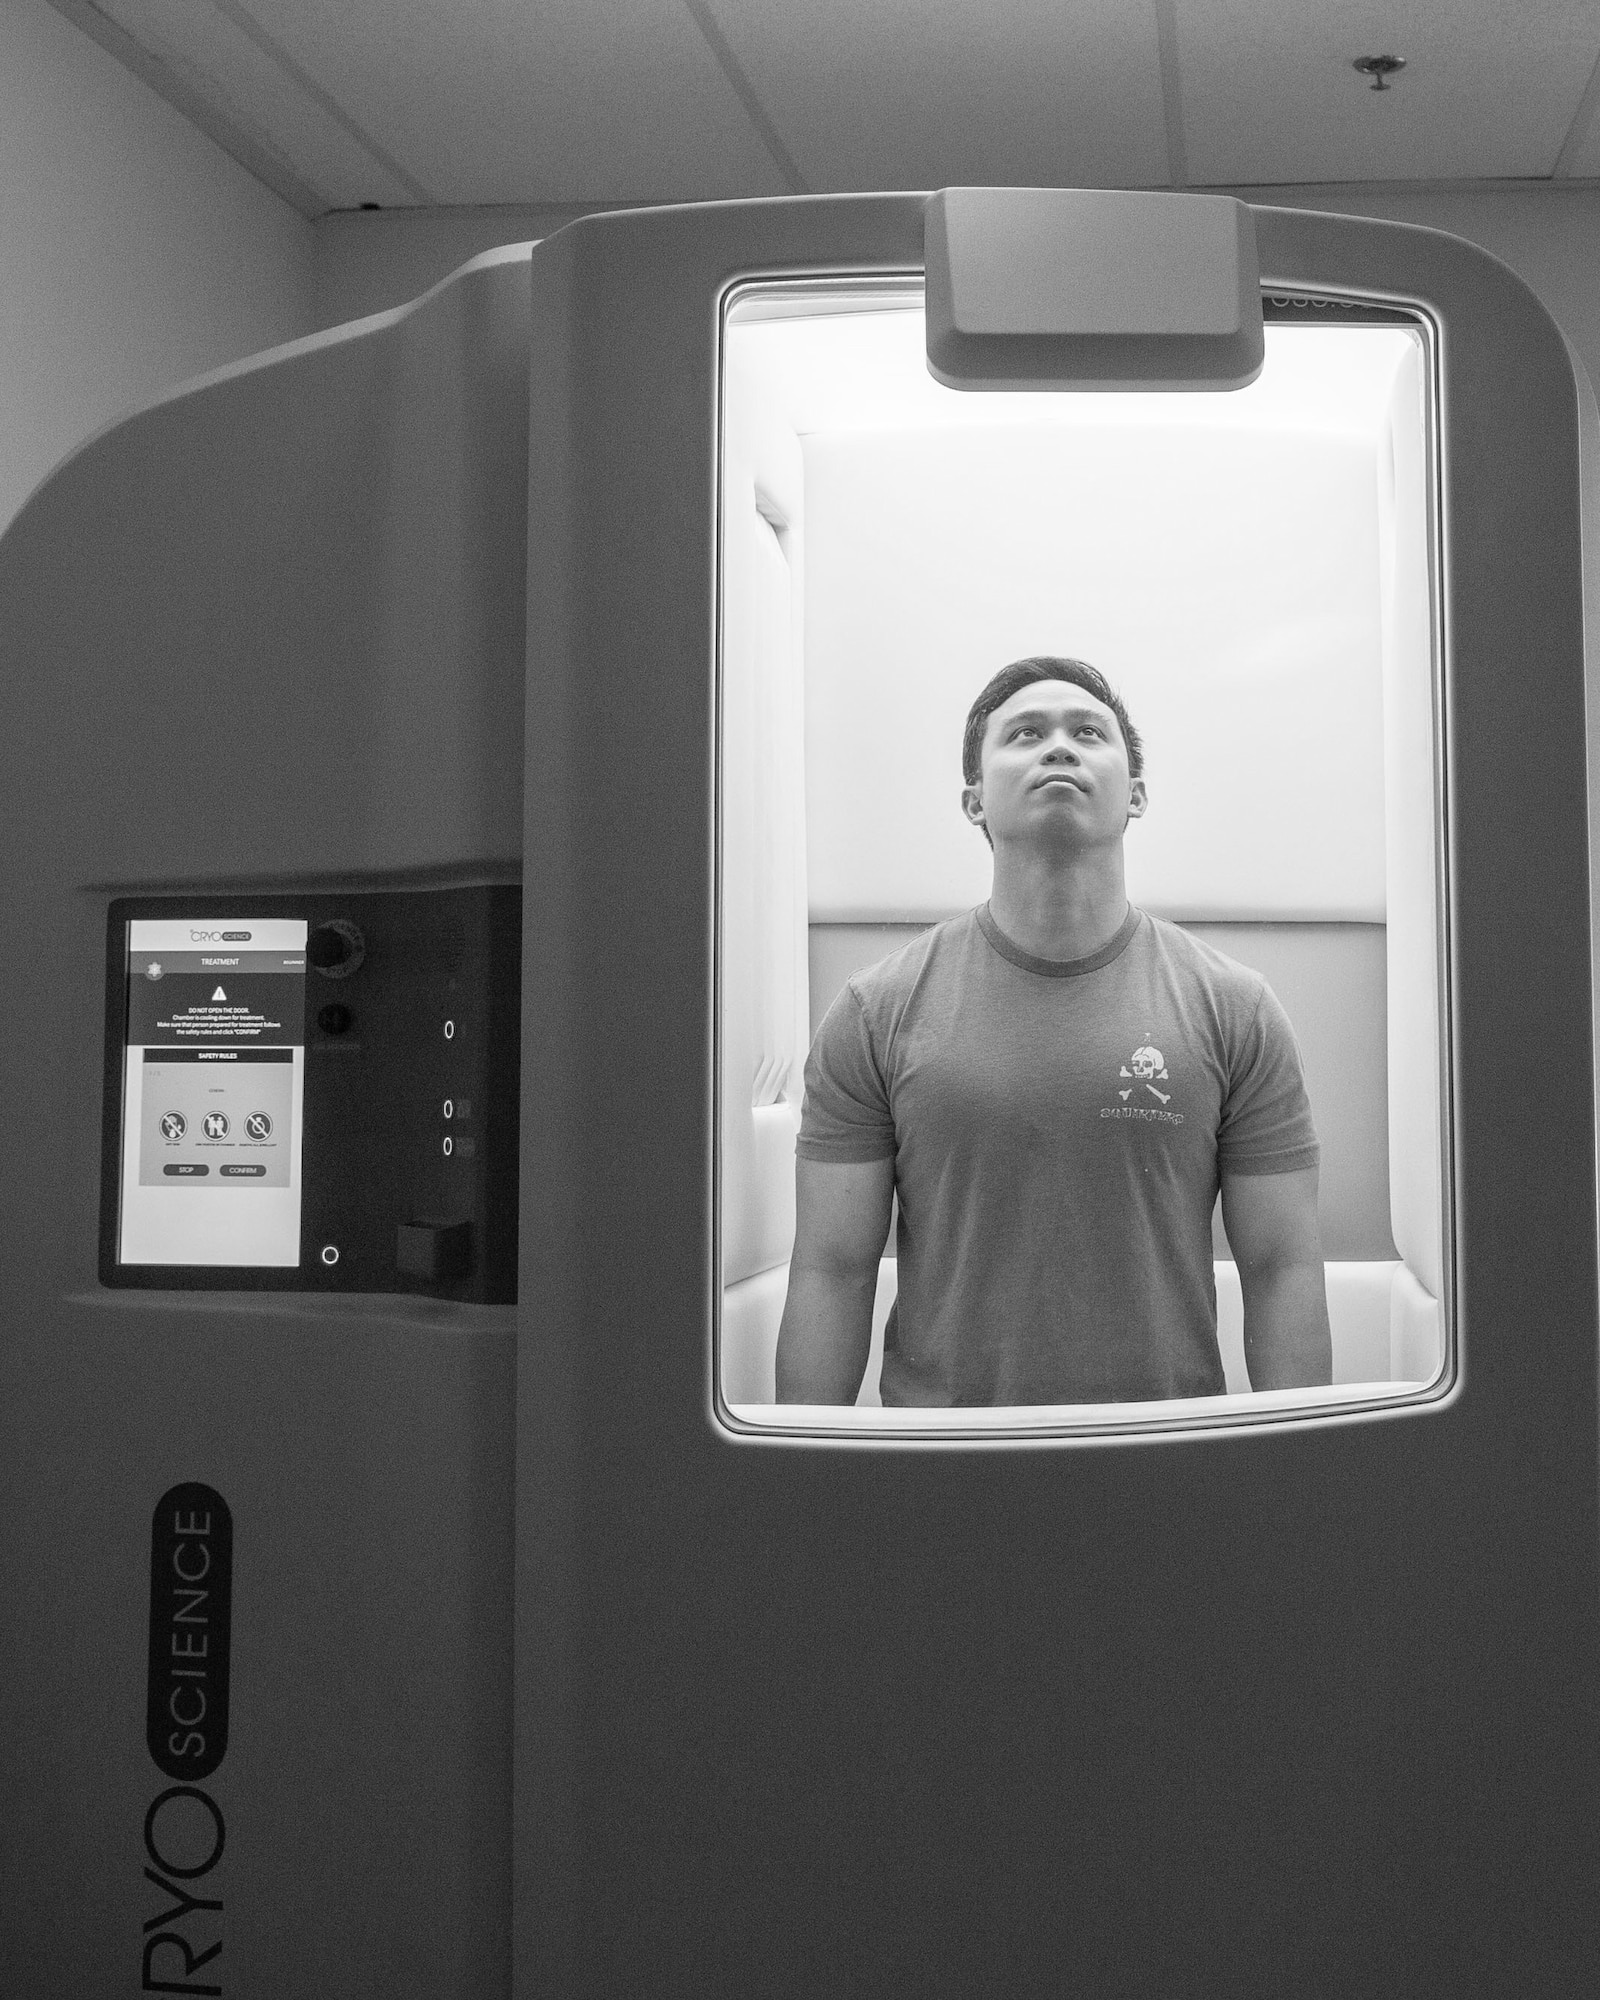 A 5th Air Support Operations Squadron Tactical Air Control Party Airman uses a cryotherapy chamber after a workout at Joint Base Lewis-McChord, Wash., March 3, 2020.